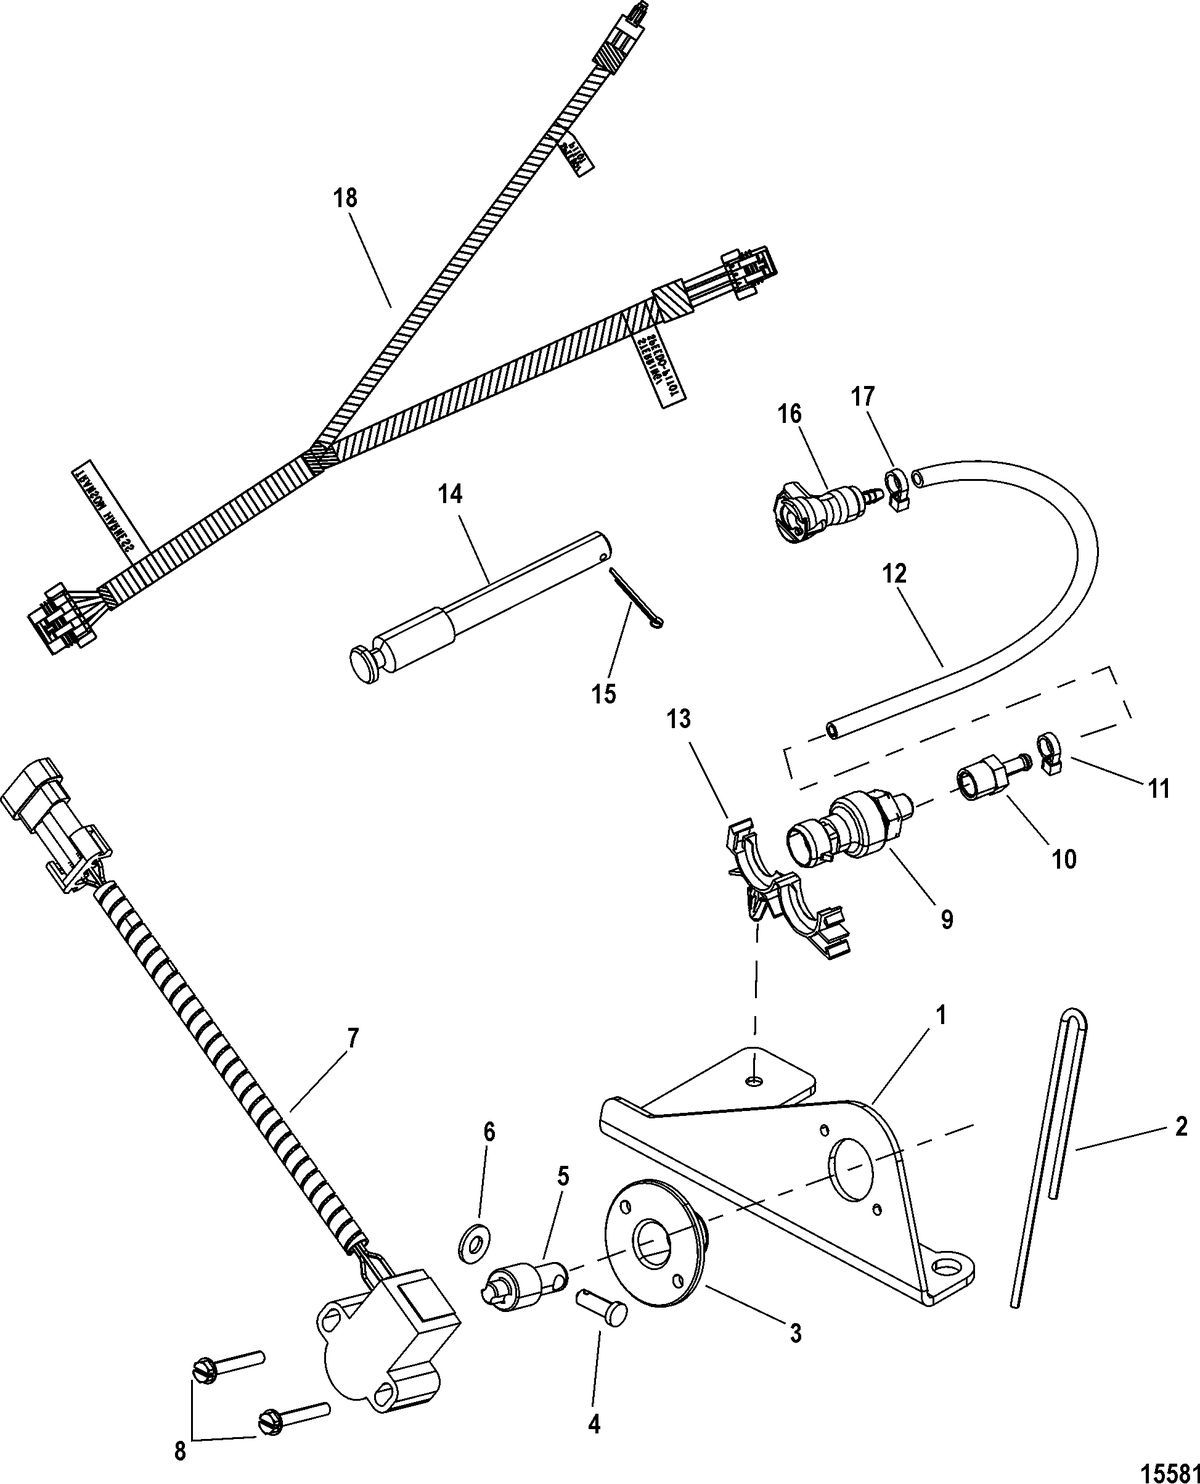 ACCESSORIES ELECTRICAL COMPONENTS AND HARNESSES Sensor Assembly-Steering(863188A 3)